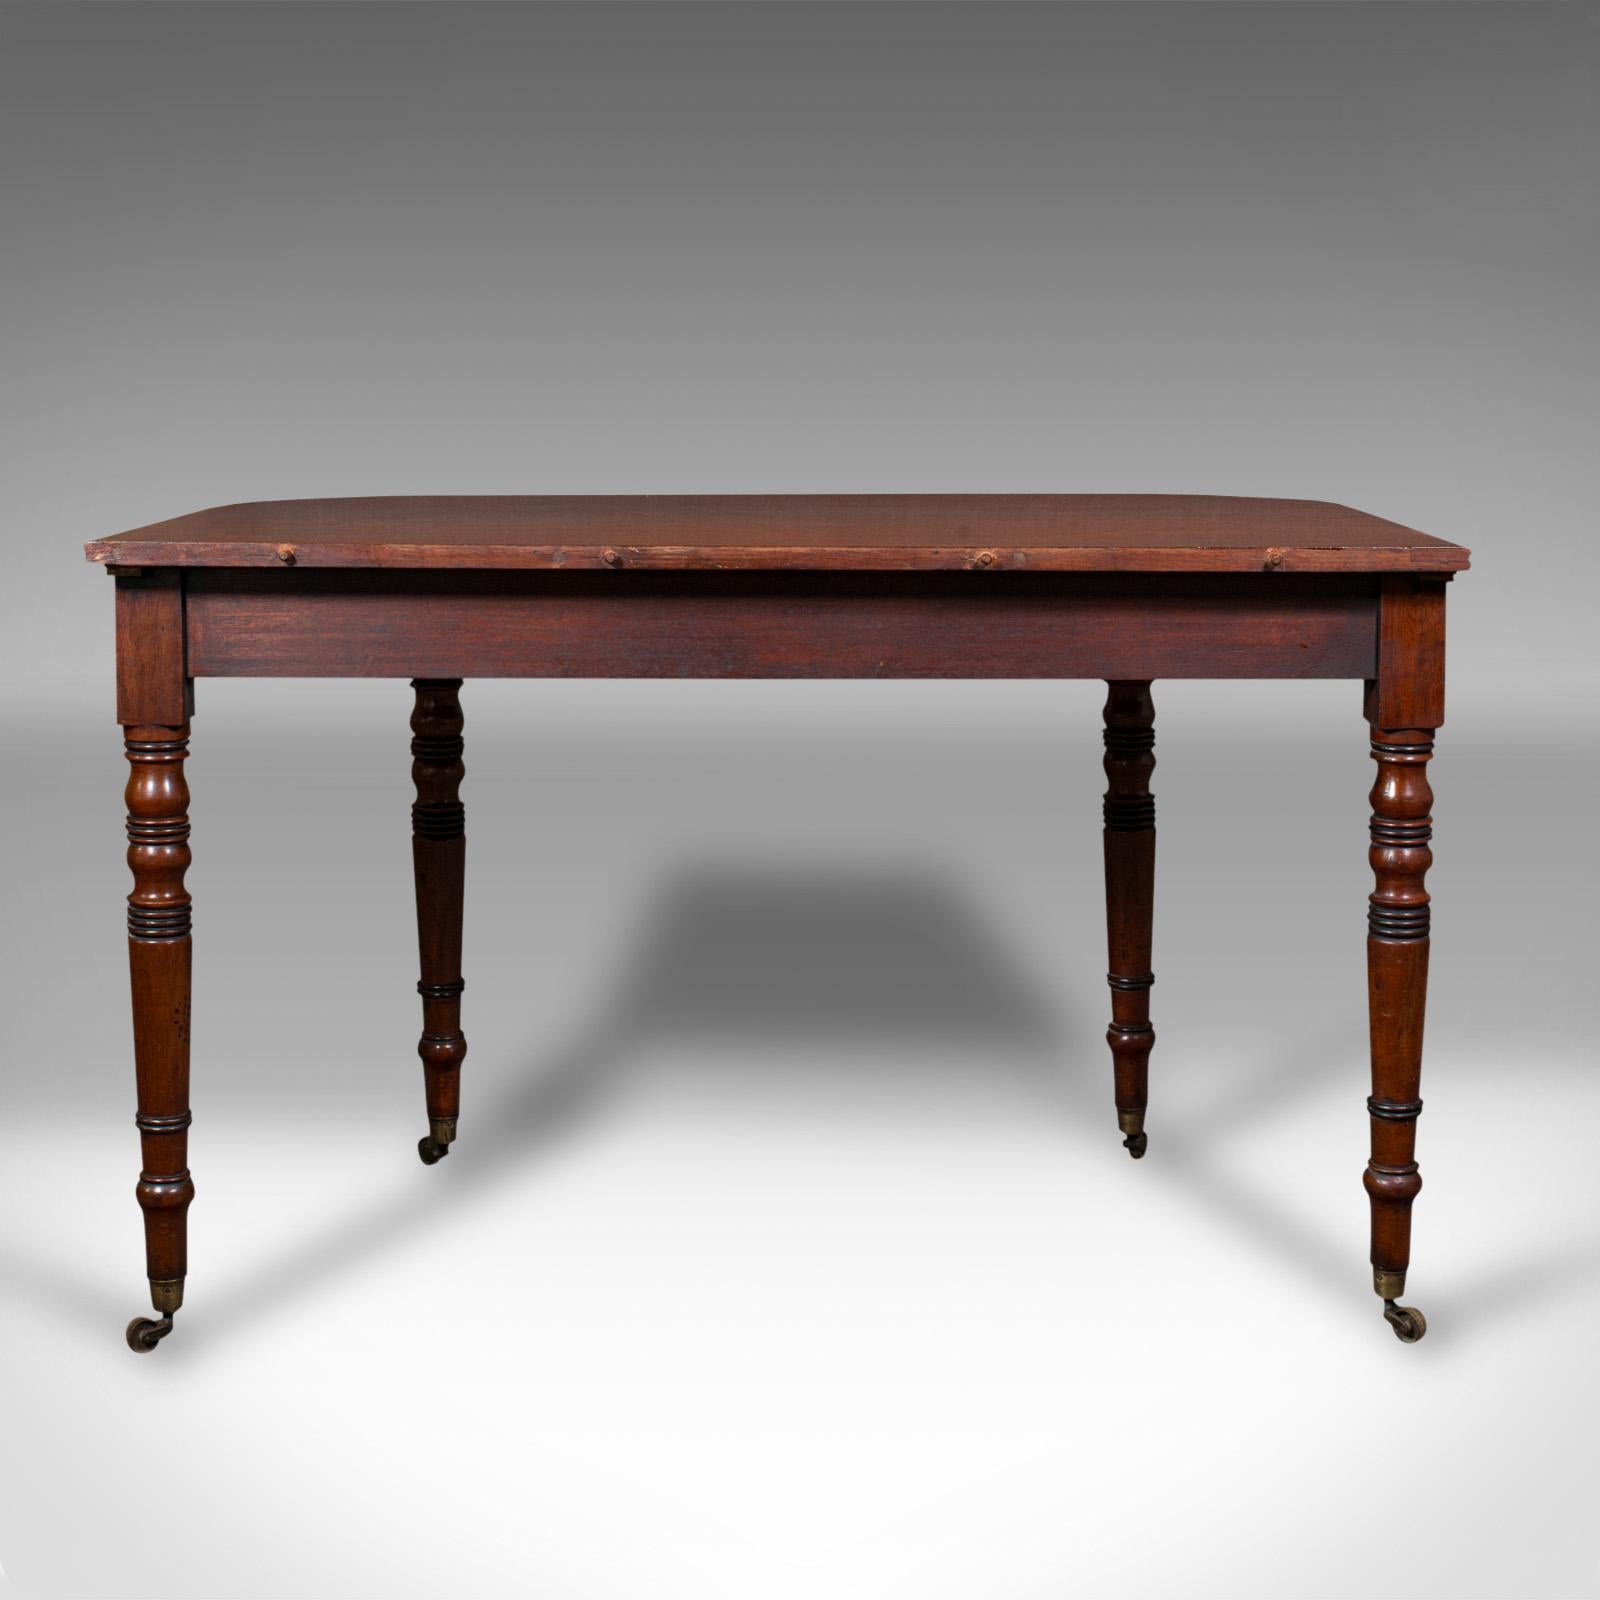 Early 19th Century Pair Of Antique Demi Lune End Tables, English, Side, Reception Hall, Regency